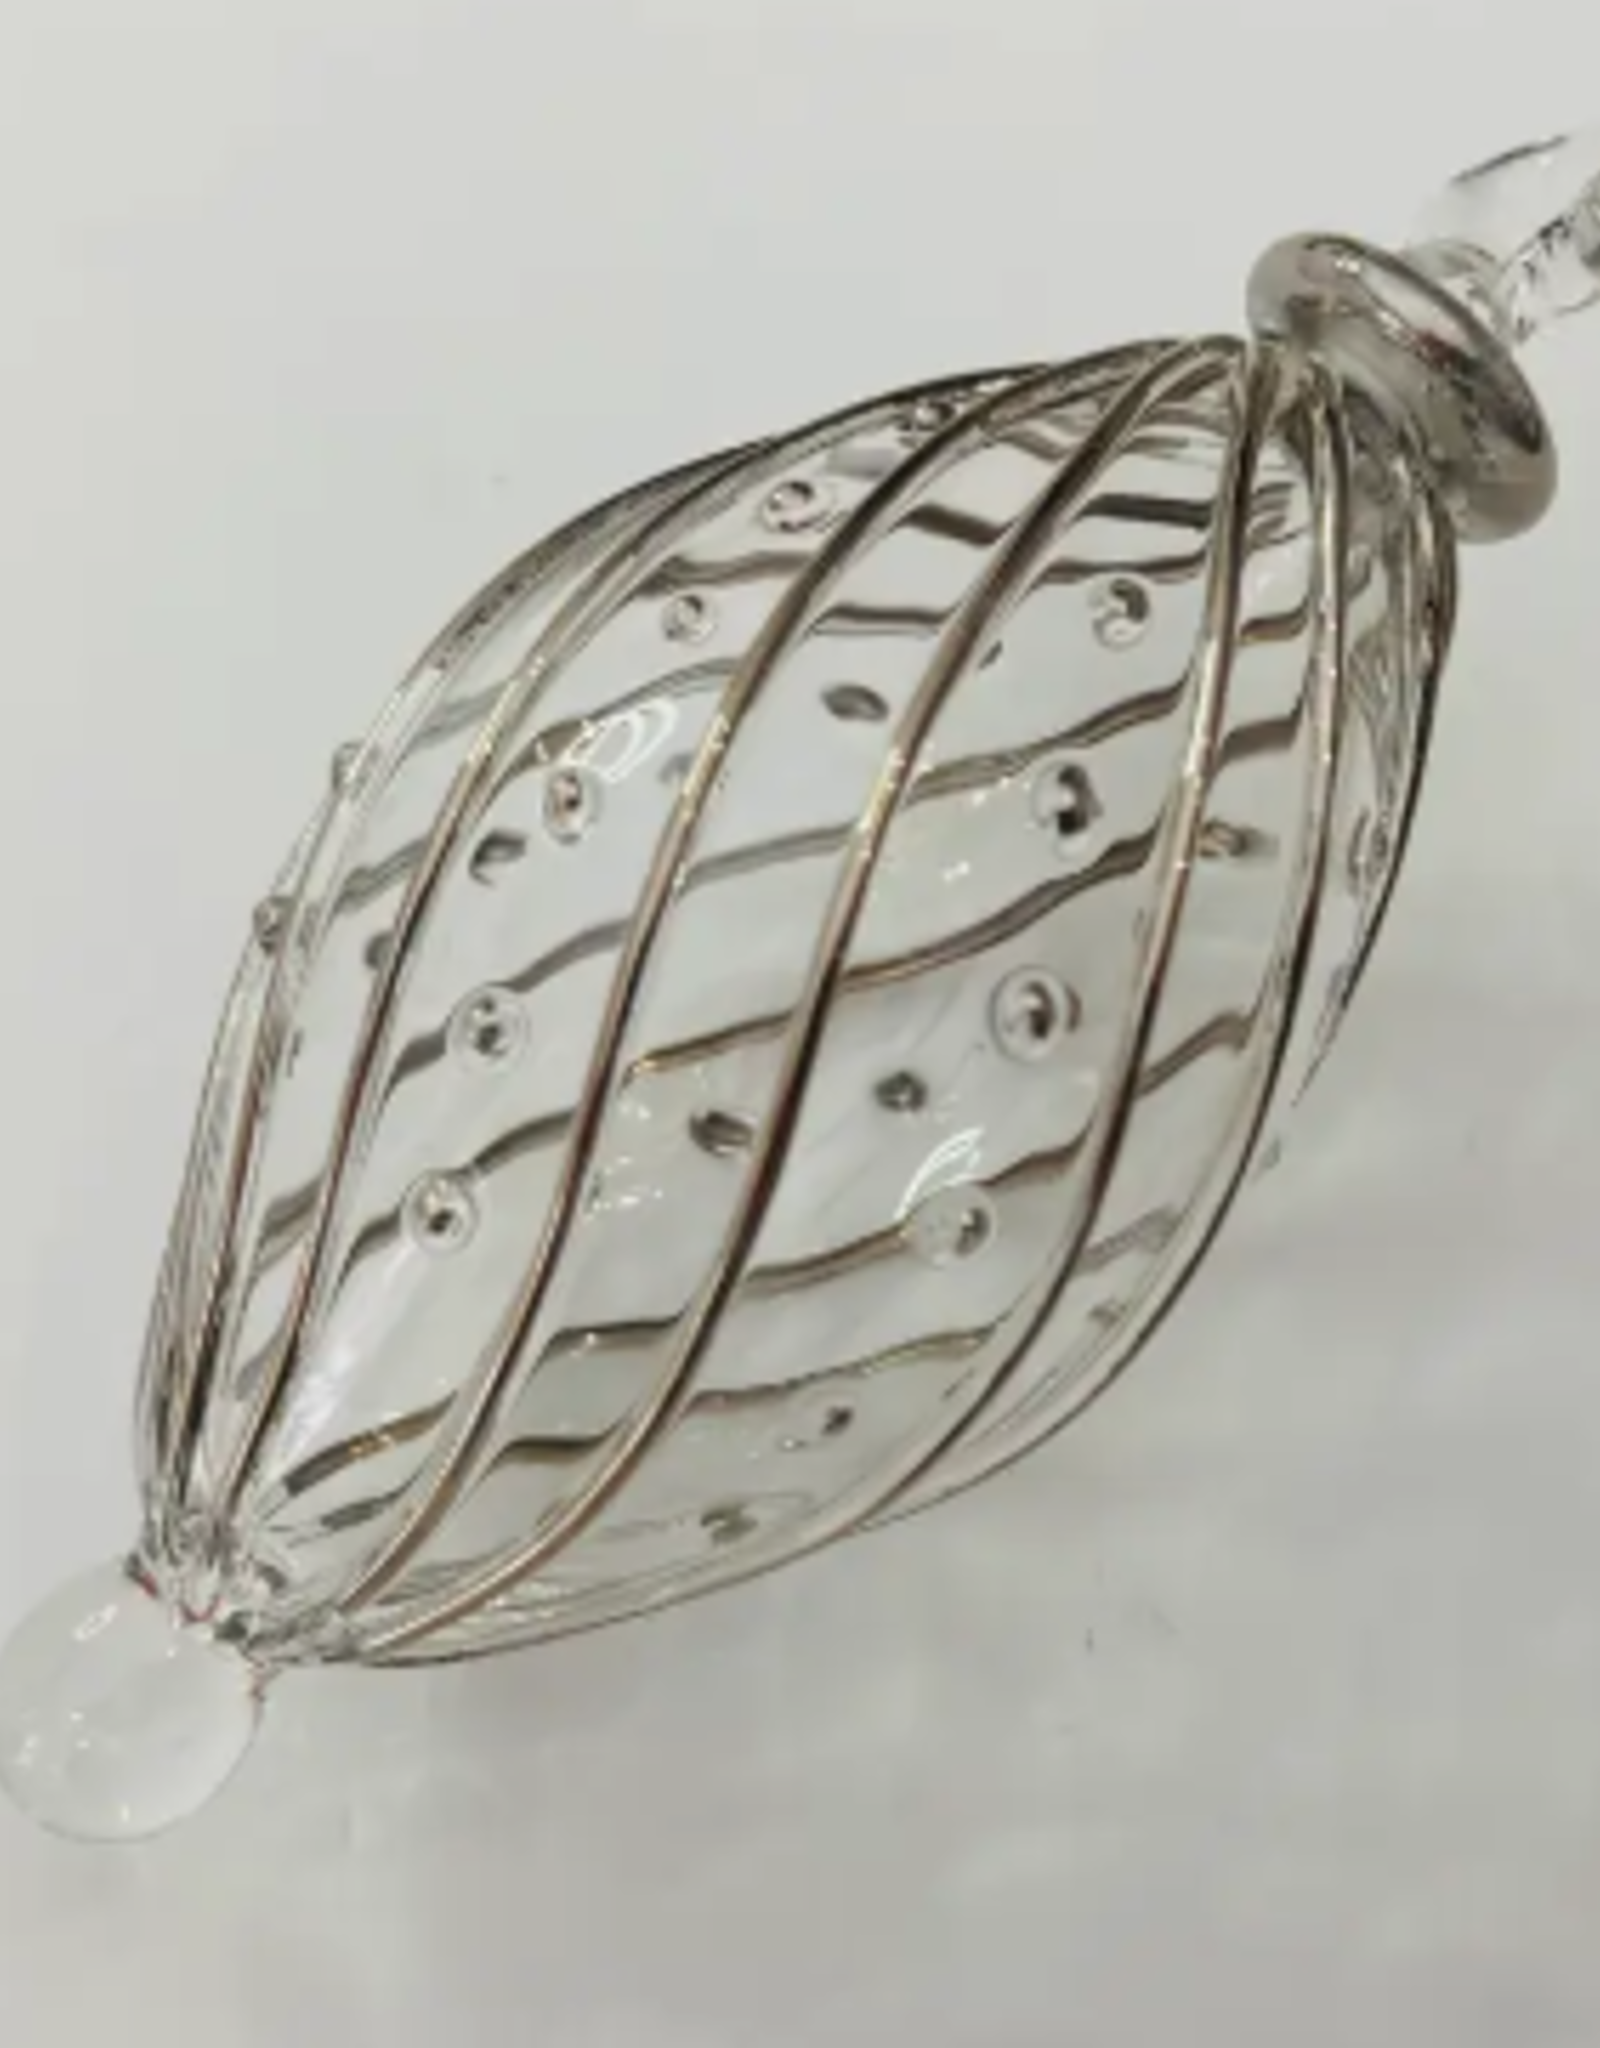 Dandarah Small Blown Glass Ornament - Silver with Dots Swirl Oval